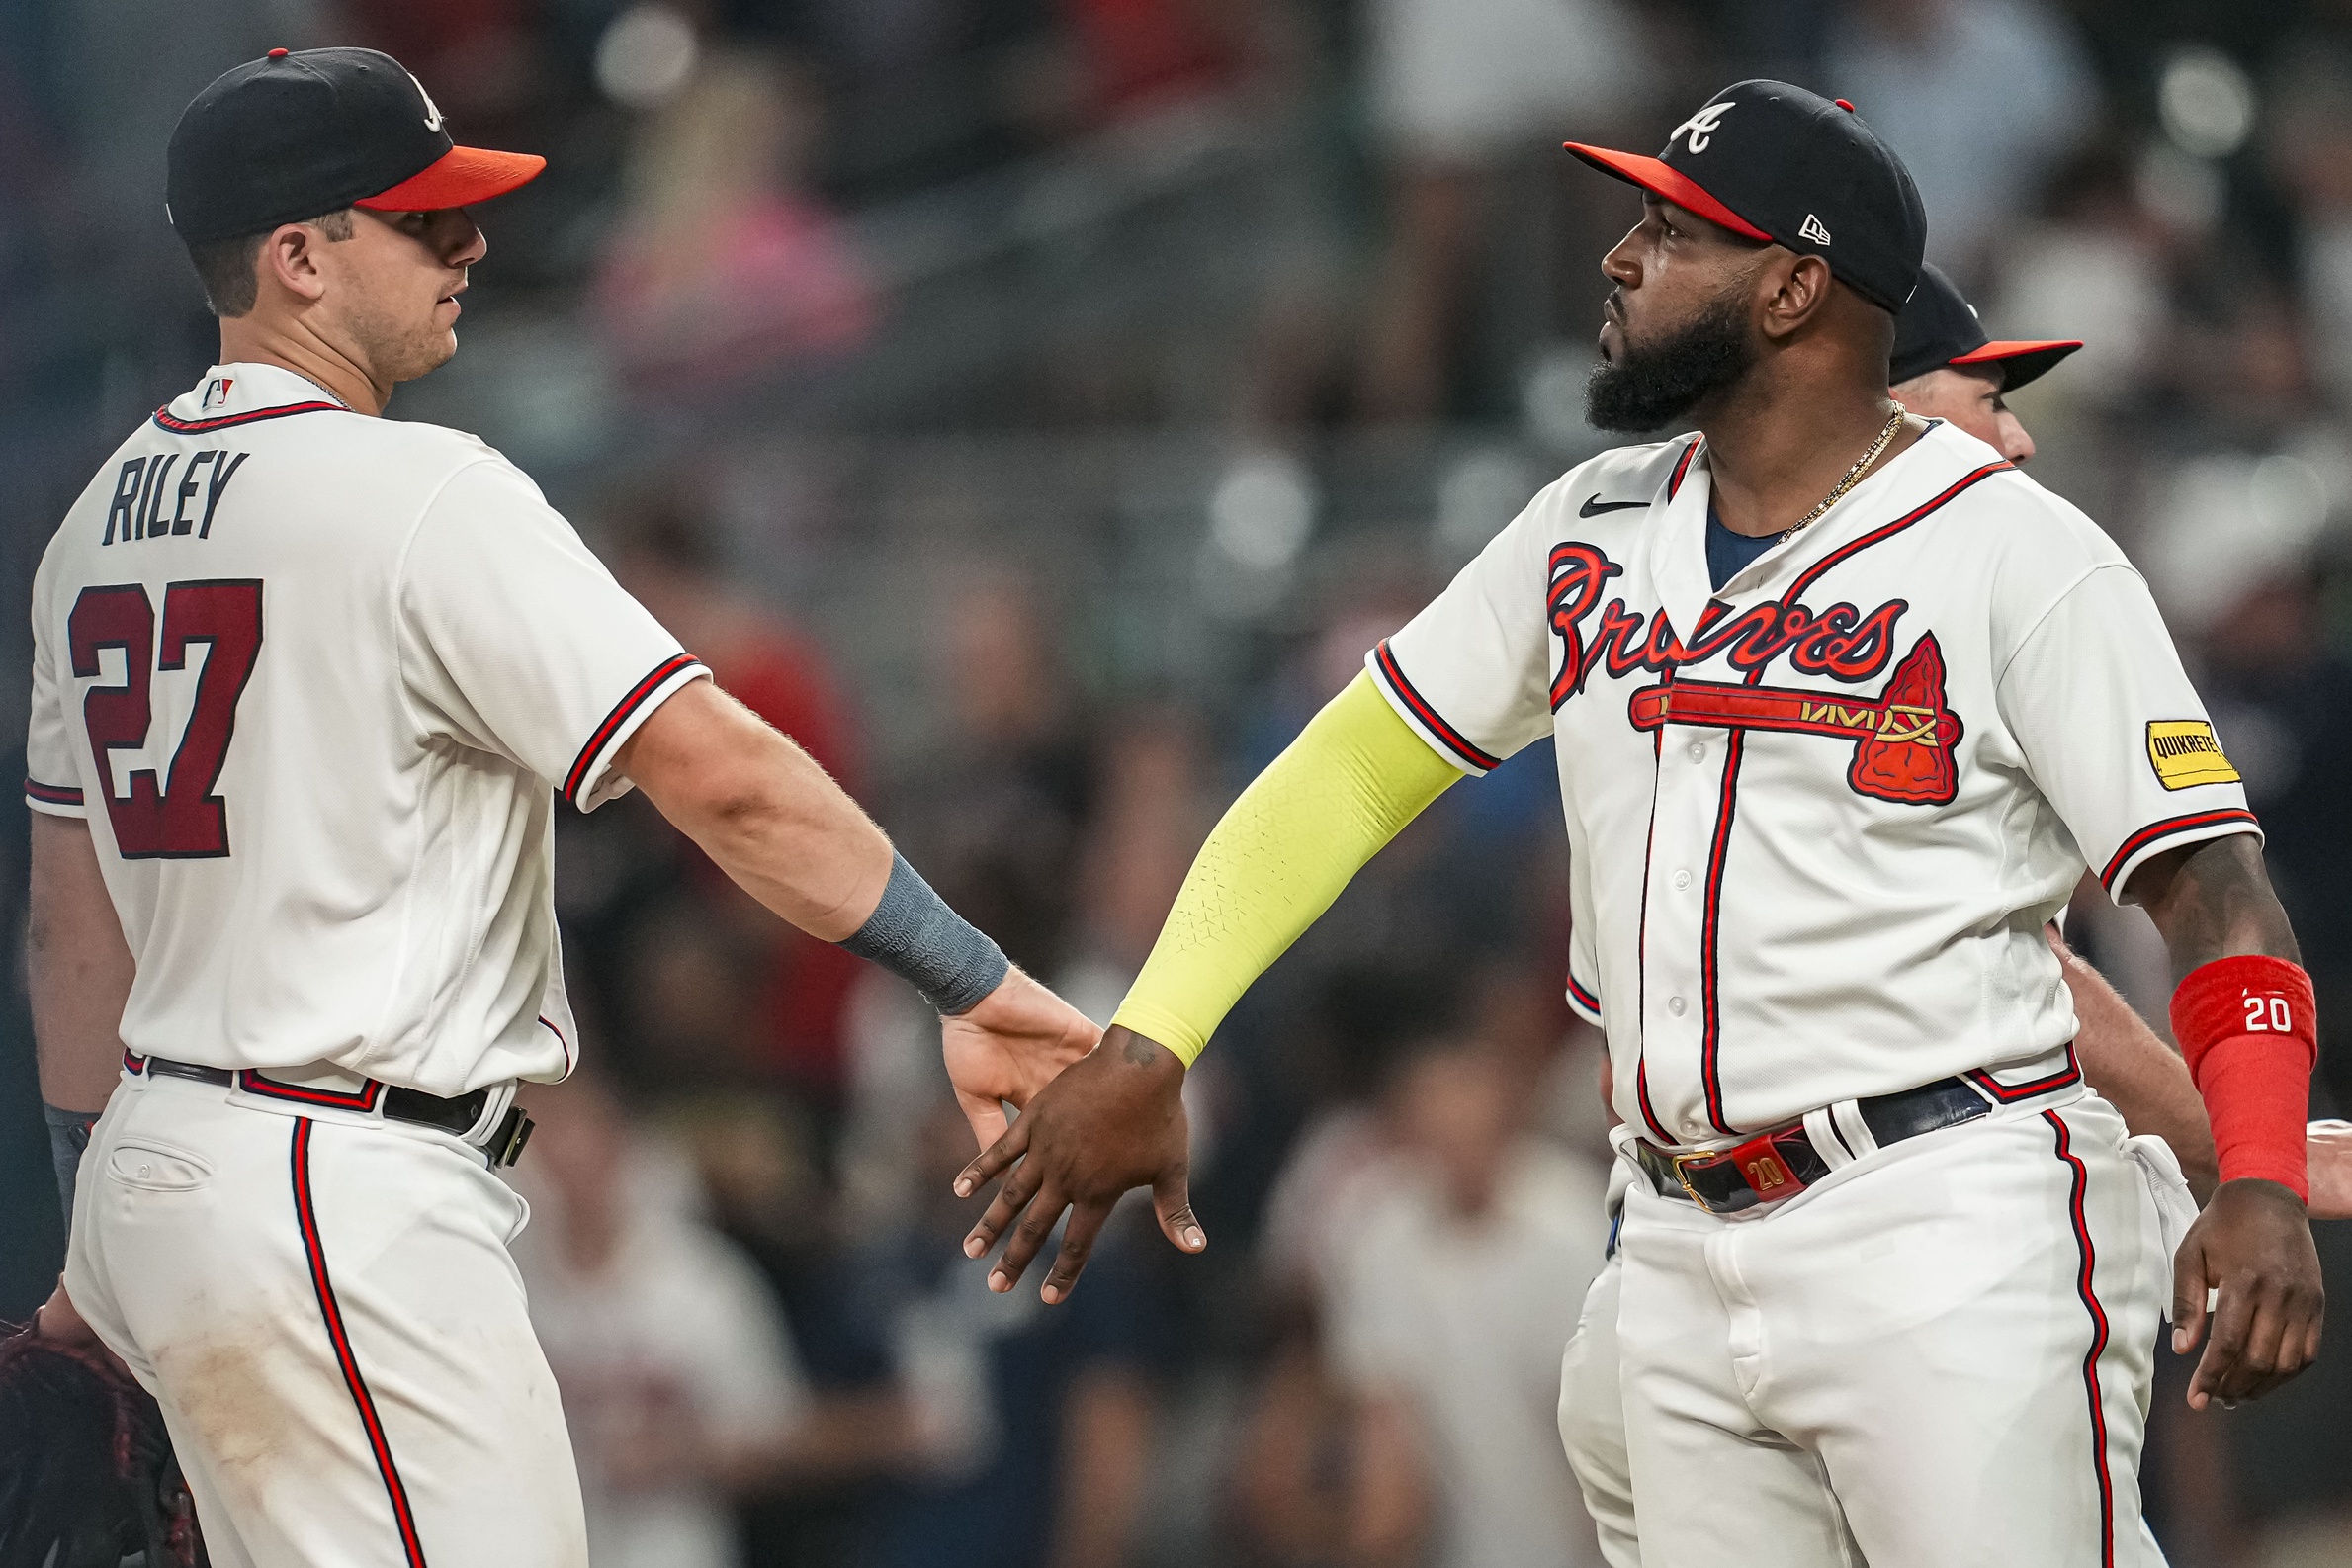 Atlanta Braves] The #Braves today reinstated INF Ozzie Albies from the  injured list, recalled RHP Darius Vines to Atlanta, and optioned LHP Jared  Shuster and INF Vaughn Grissom to Triple-A Gwinnett. 